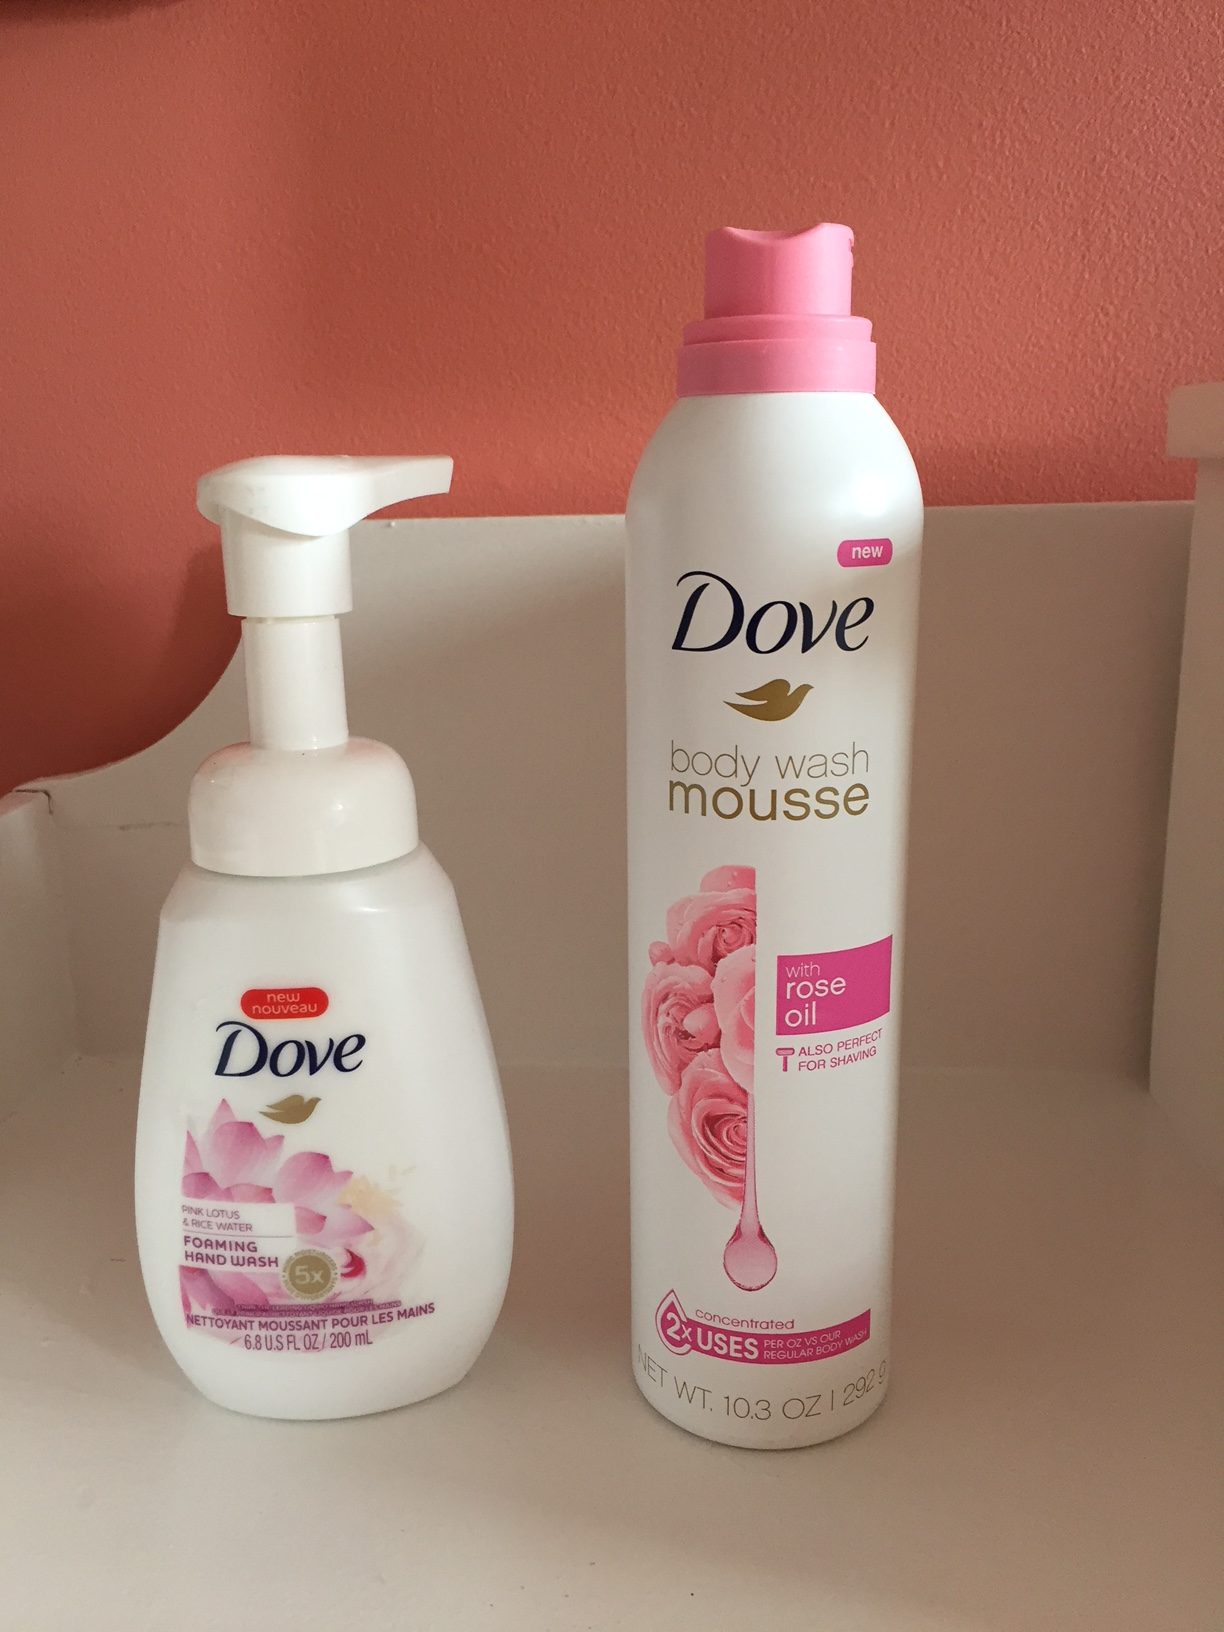 Review, Ingredients, Photos, Skincare Trend, 2019, 2020: Best Drugstore Body Products, Dove, Body Wash Mousse with Rose Oil, Foaming Hand Wash